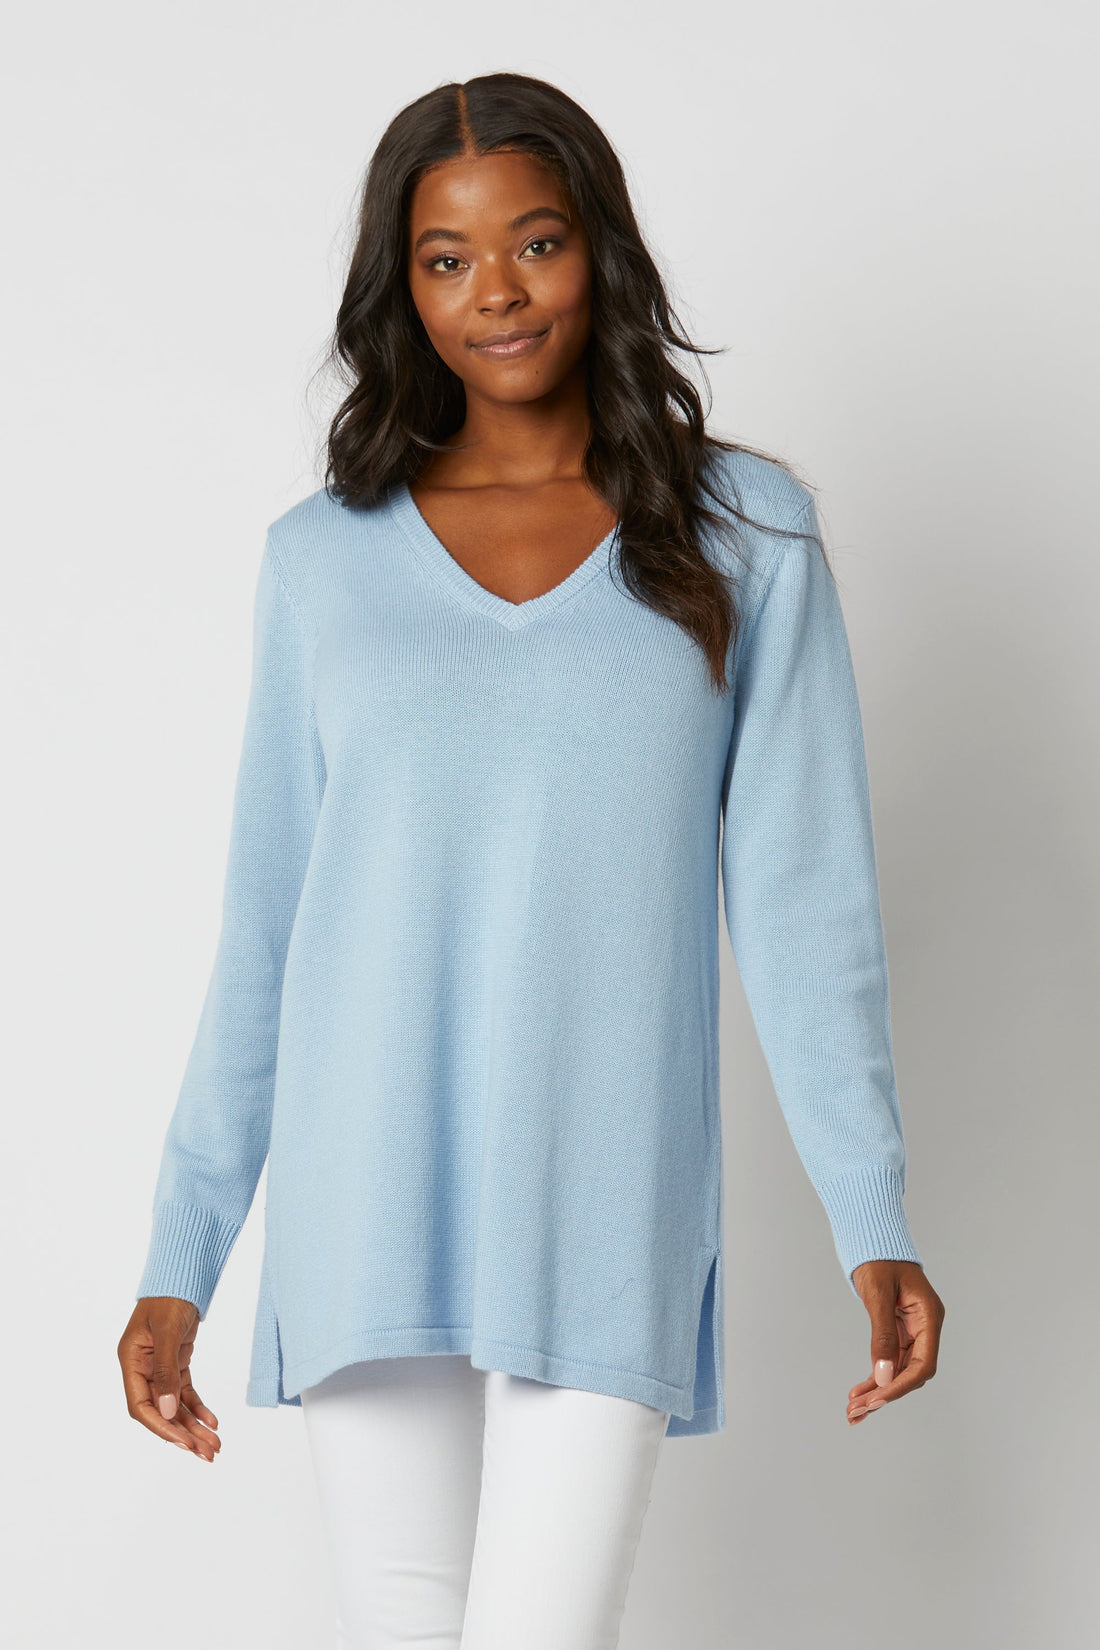 Placid Blue V Neck Tunic Sweater – Sail to Sable